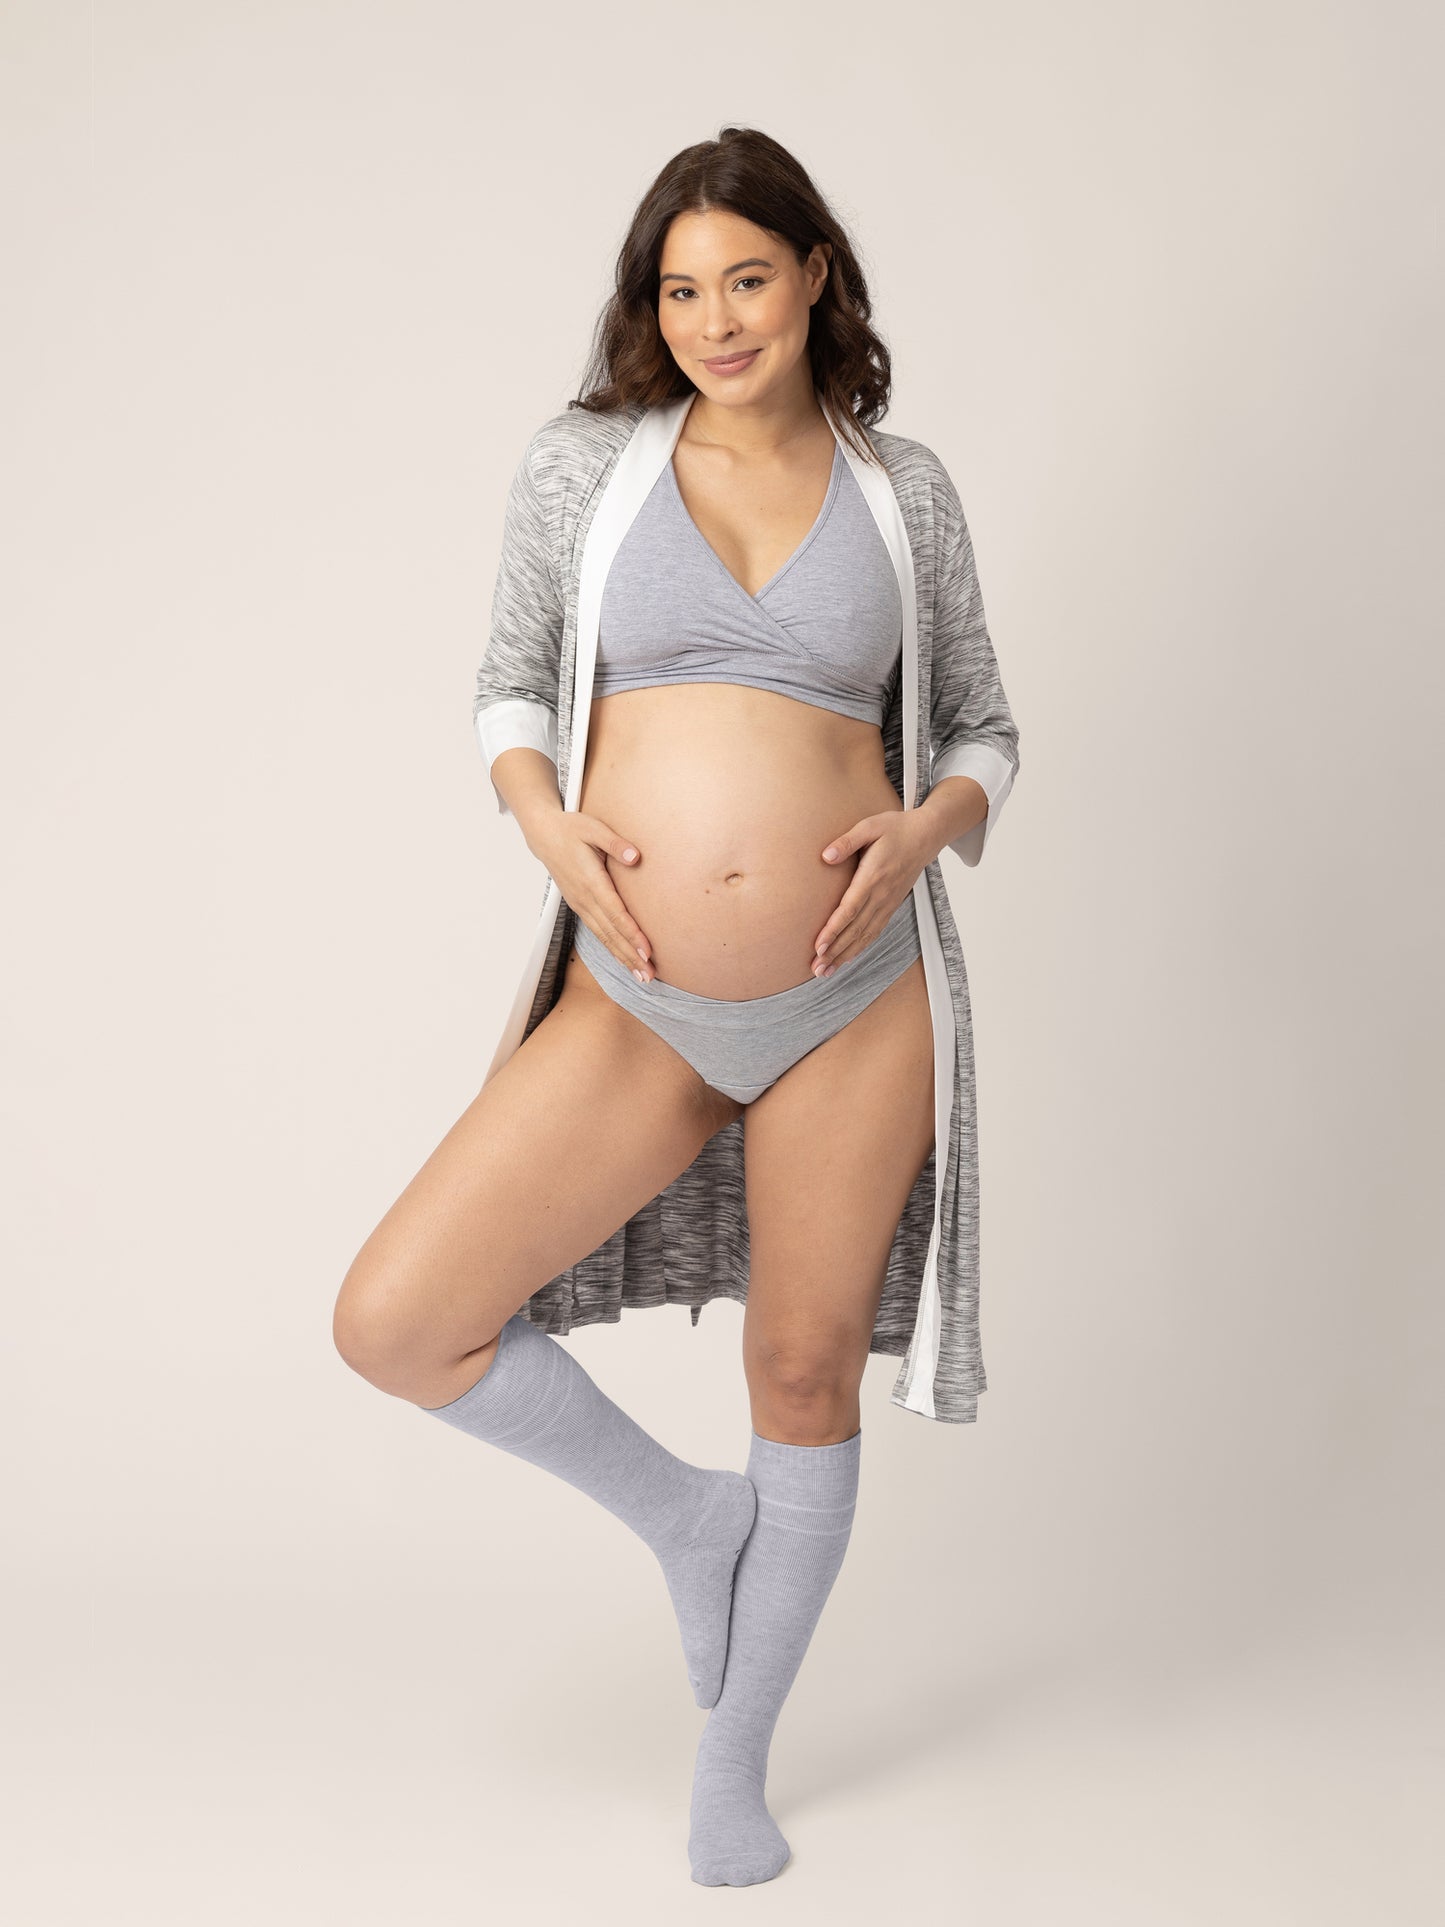 Premium Photo  A pregnant woman in an underwear with hands on her belly